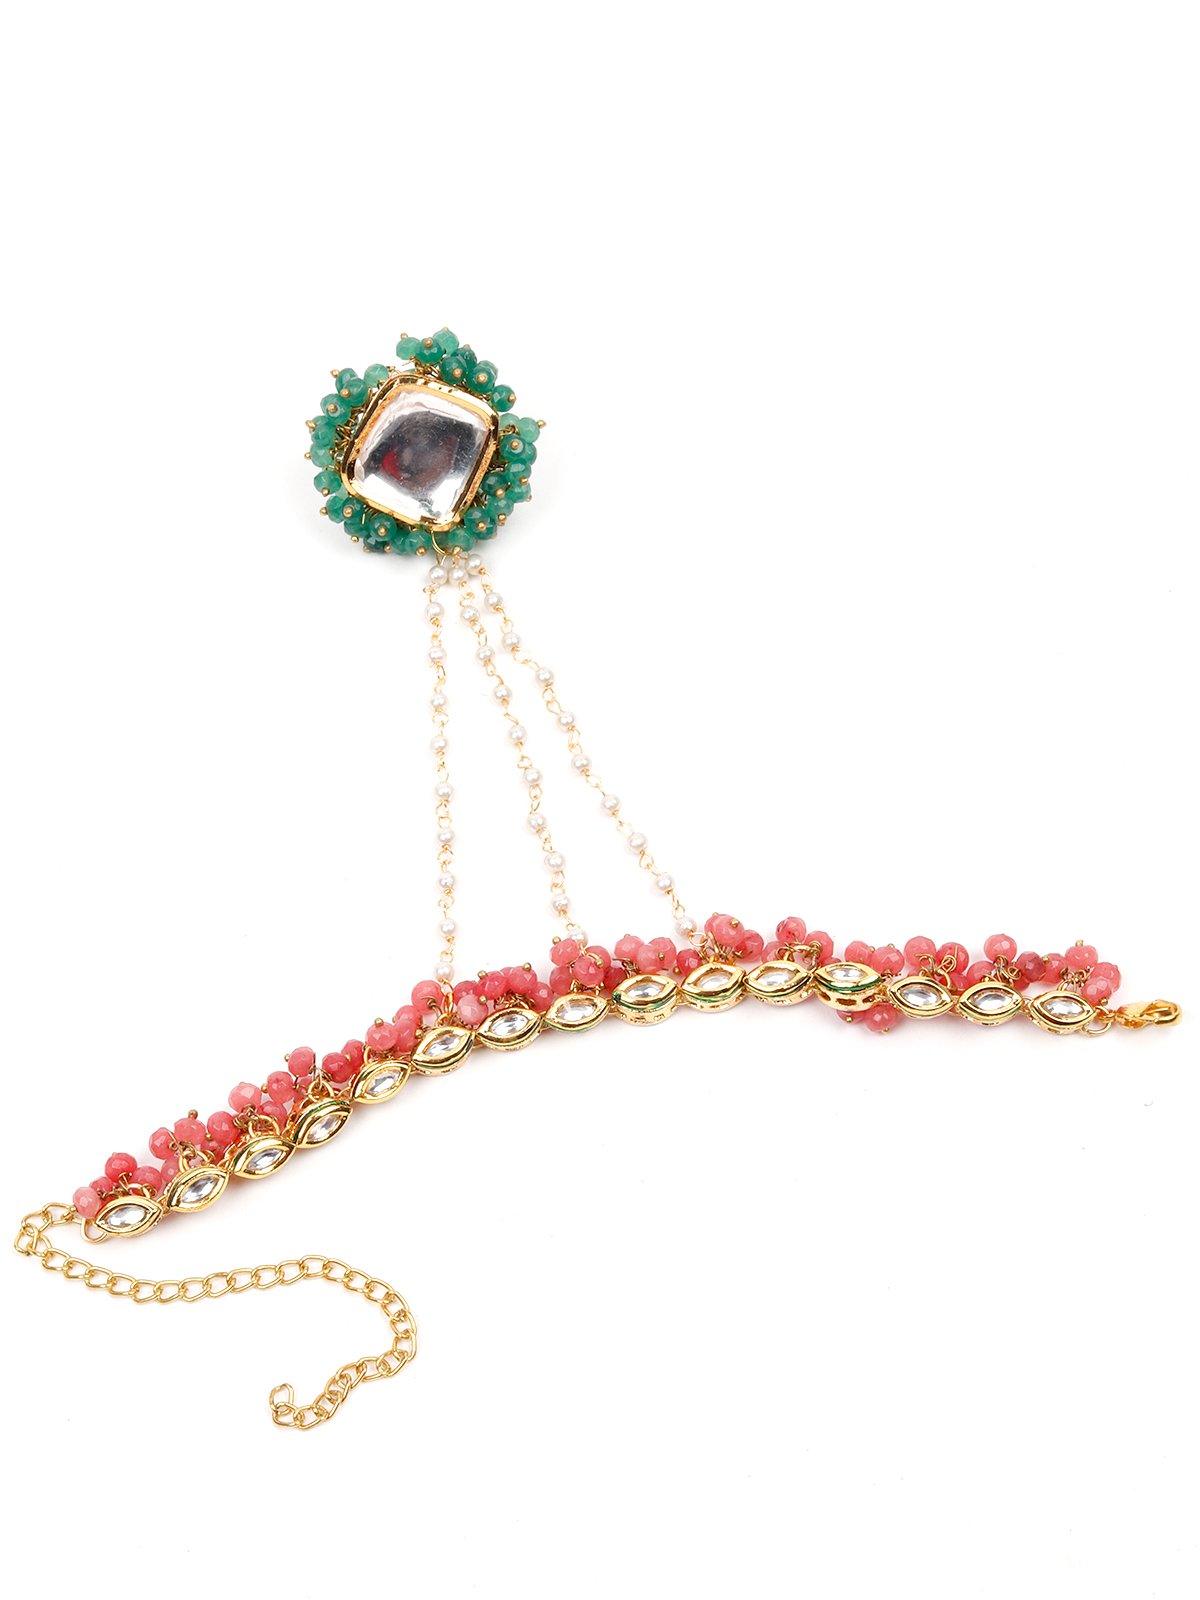 Women's Kundan Bracelet With An Attached Ring-Red&Green - Odette